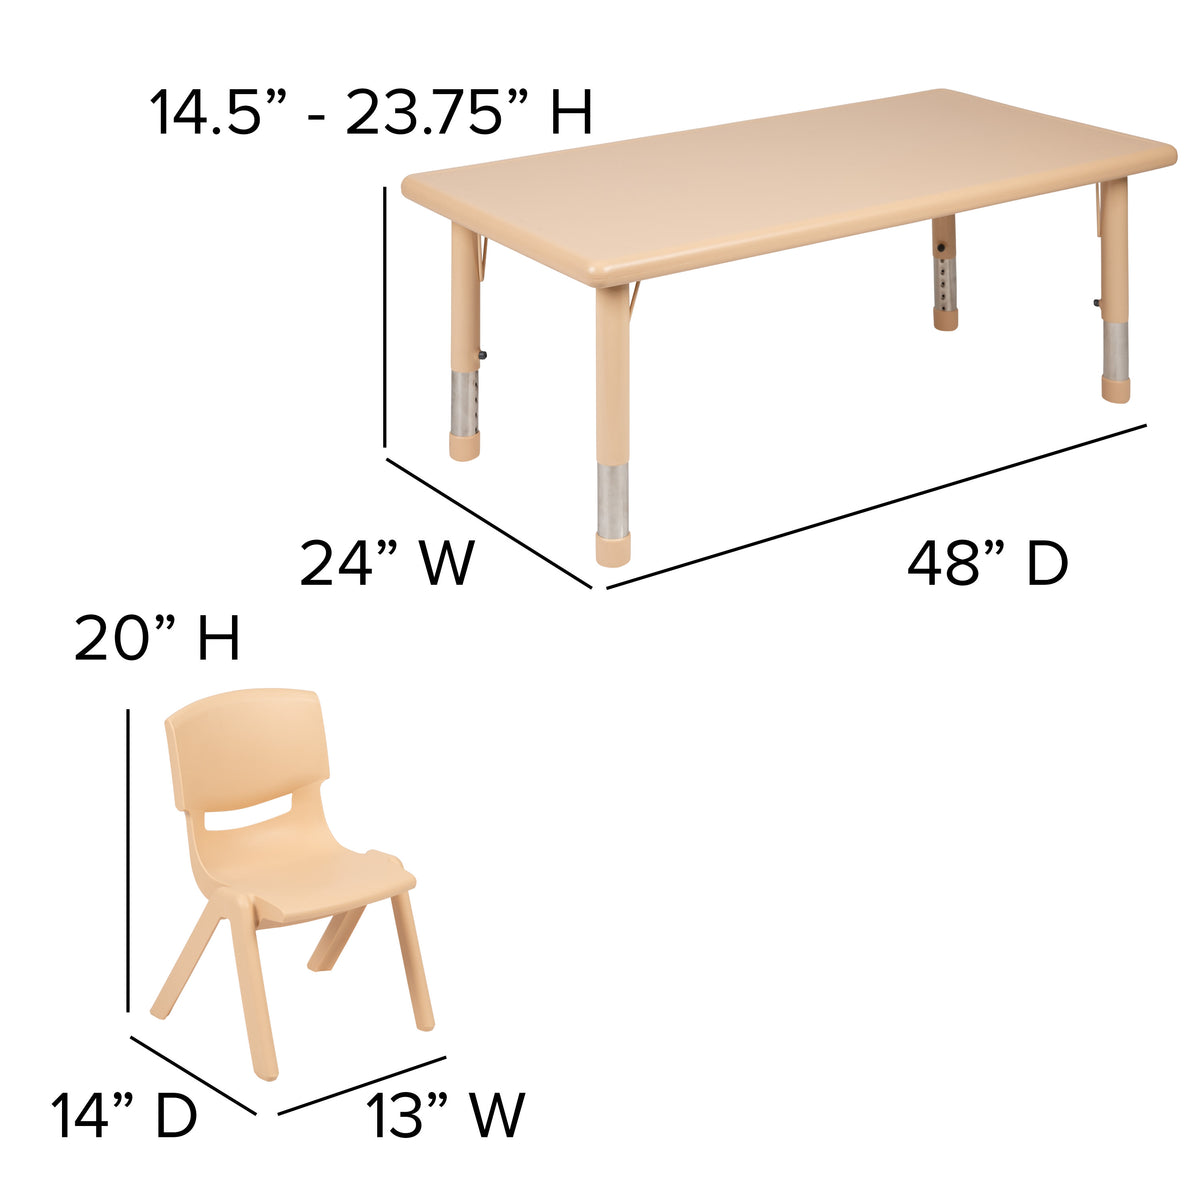 Natural |#| 24inchW x 48inchL Rectangle Natural Plastic Adjustable Activity Table Set - 6 Chairs